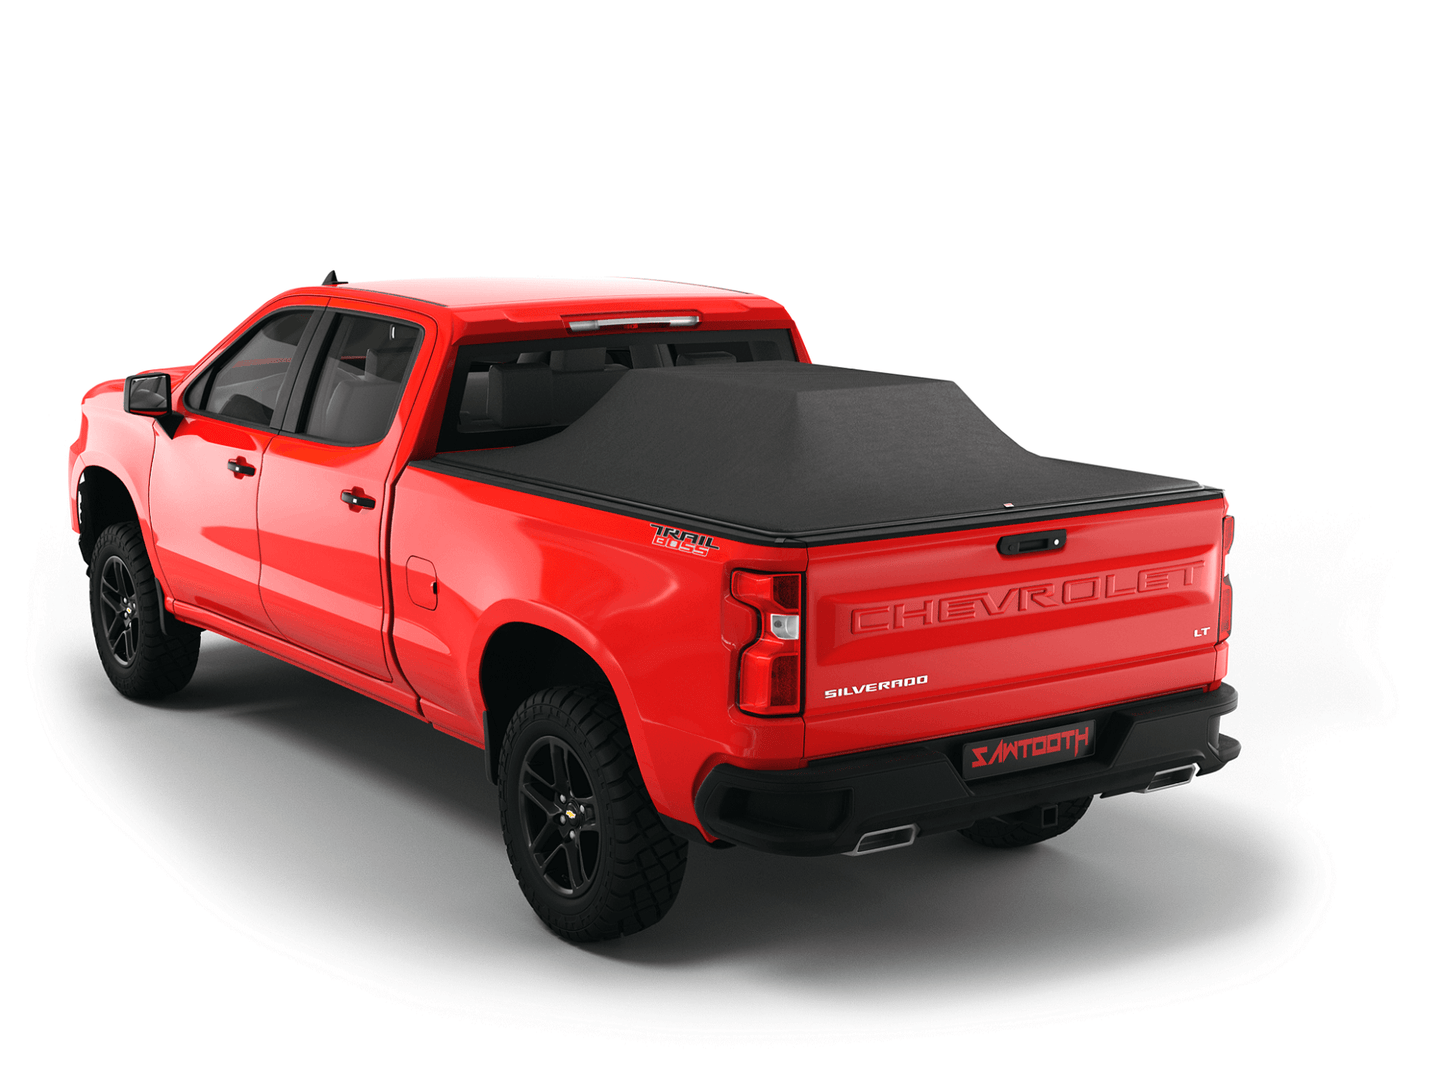 Red Chevrolet Silverado 1500 / GMC Sierra 1500 with gear in the truck bed and the Sawtooth Stretch tonneau cover expanded over cargo load